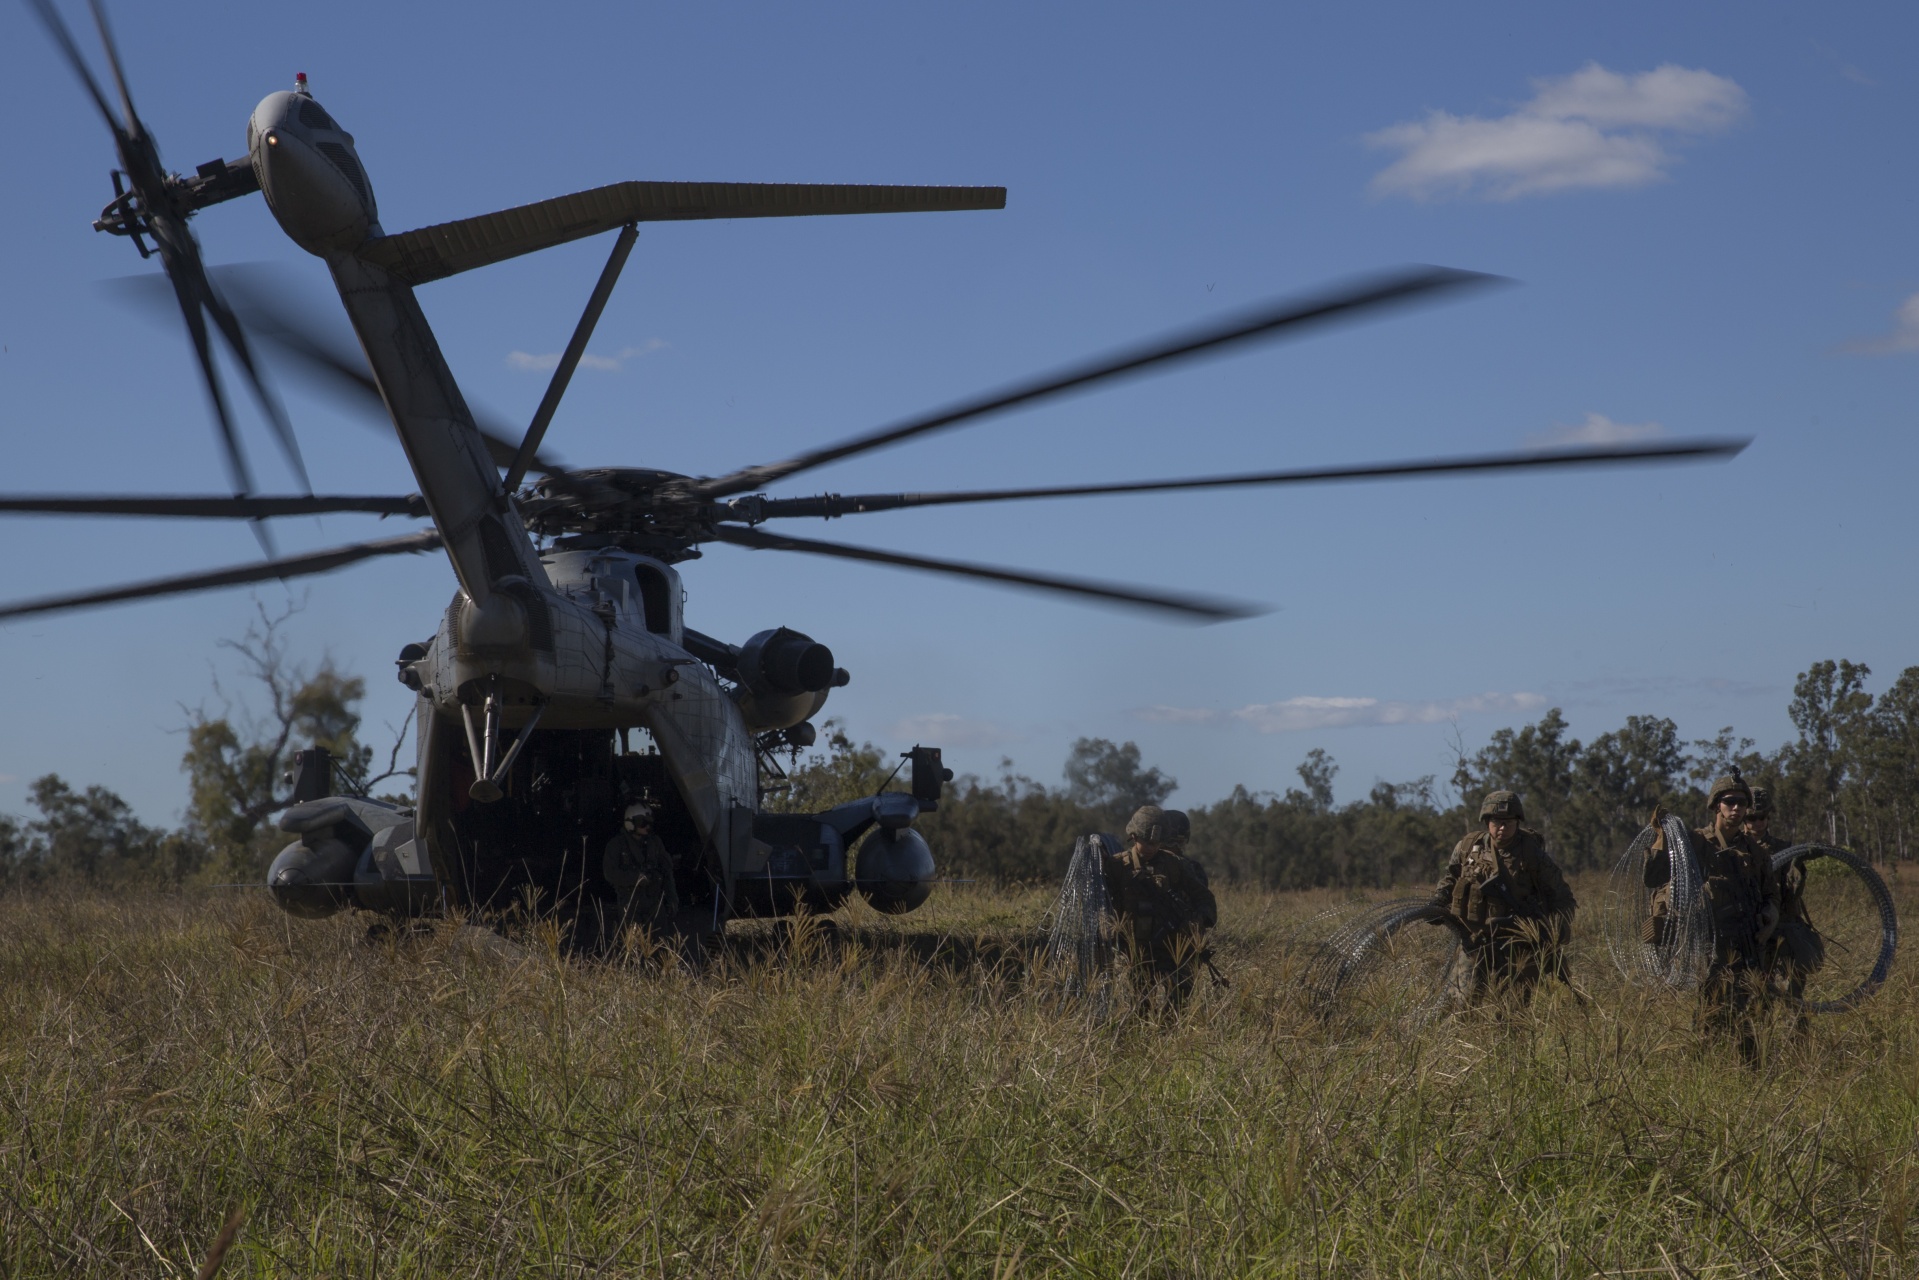 Marines with Kilo Company, Battalion Landing Team, 3rd Battalion, 5th Marines, carry concertina wire off of a CH-53E Super Stallion helicopter during an embassy reinforcement exercise a part of Certification Exercise at Shoalwater Bay Training Area,